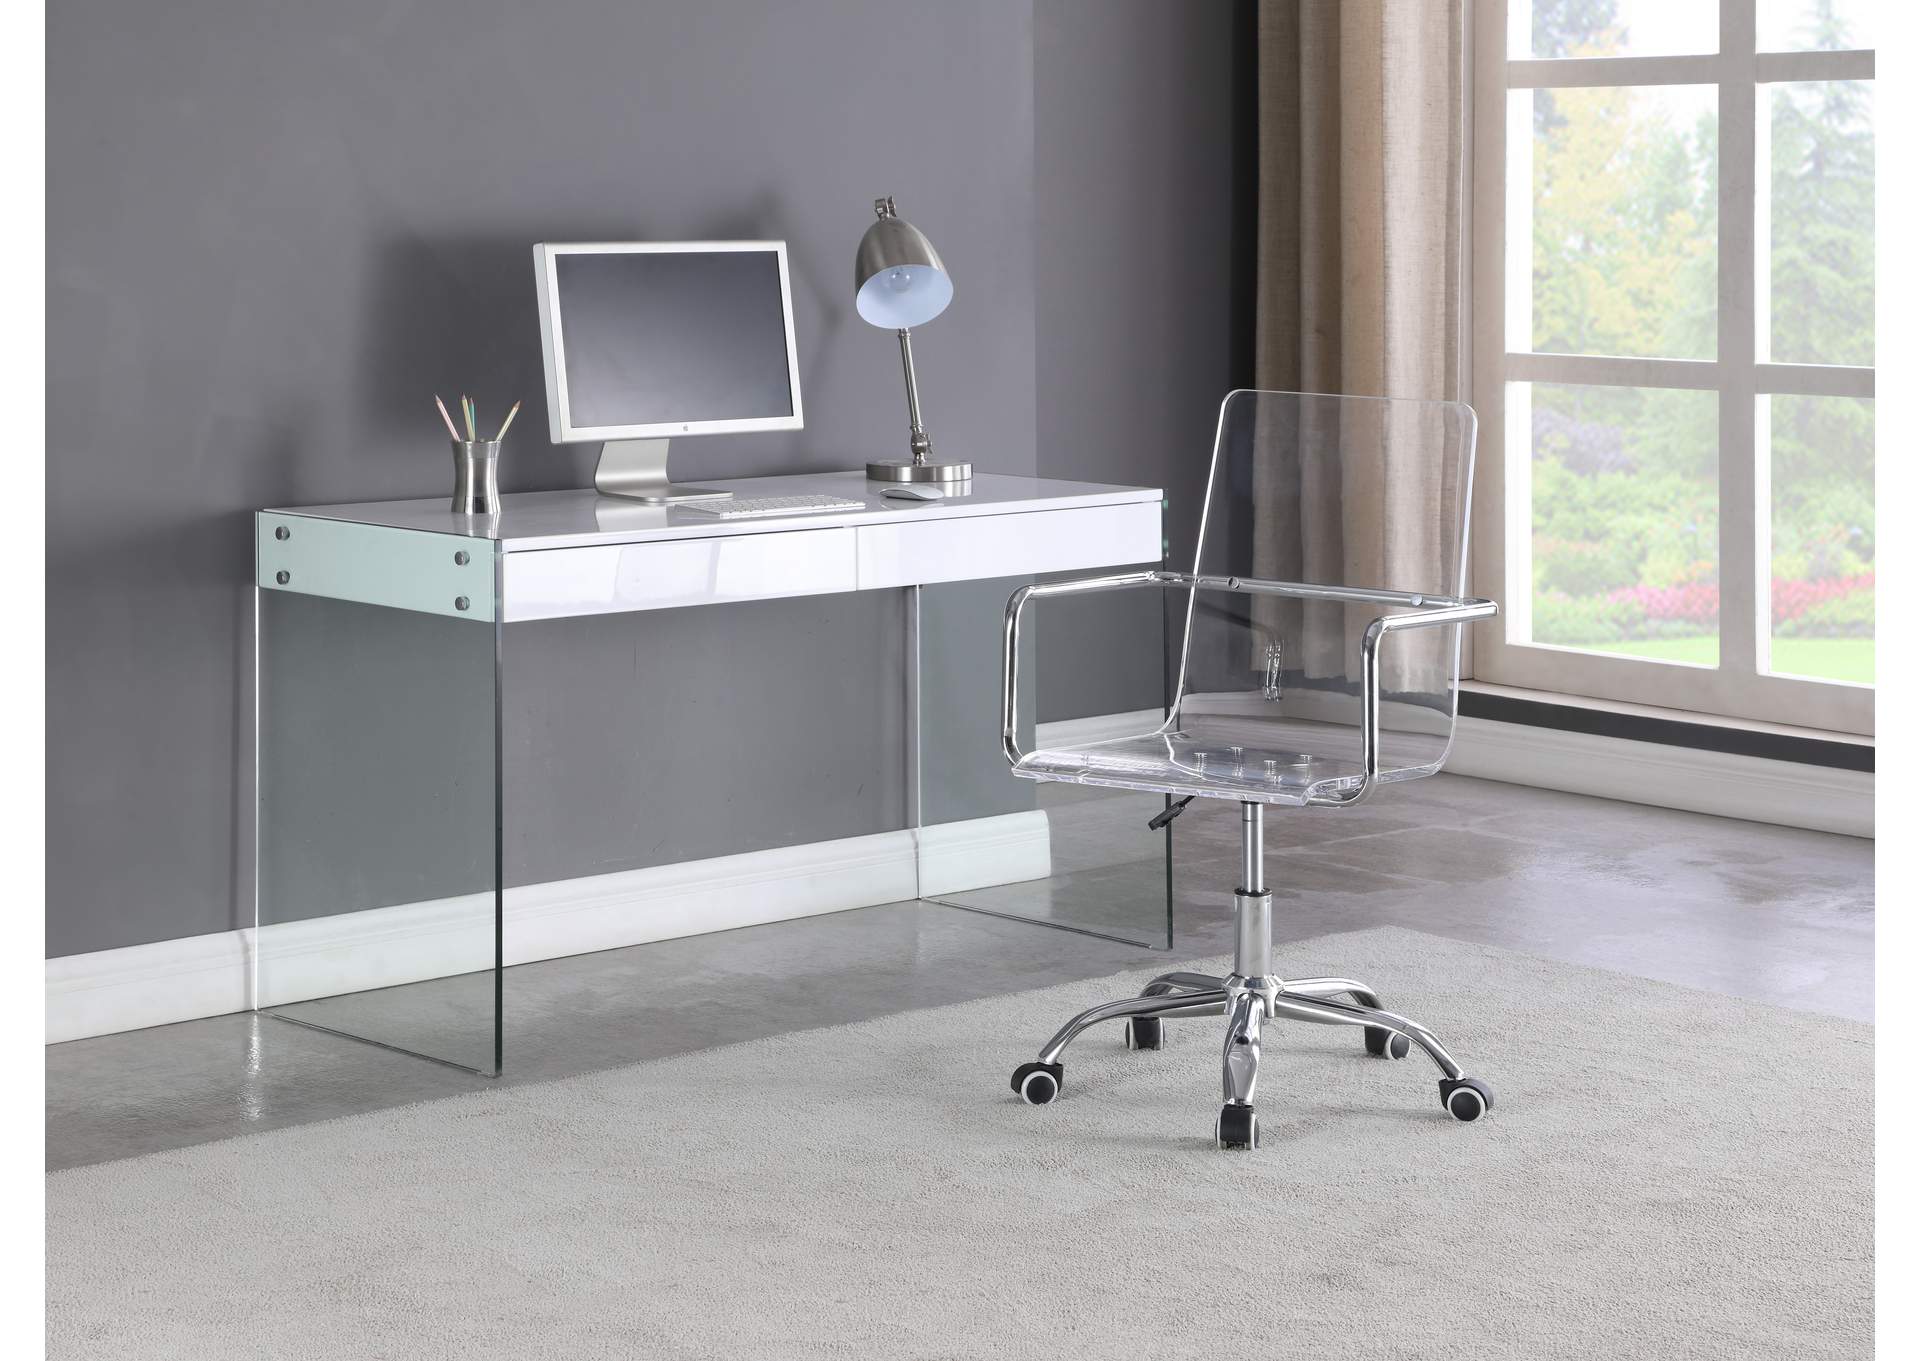 Contemporary Gloss White & Glass Desk,Chintaly Imports